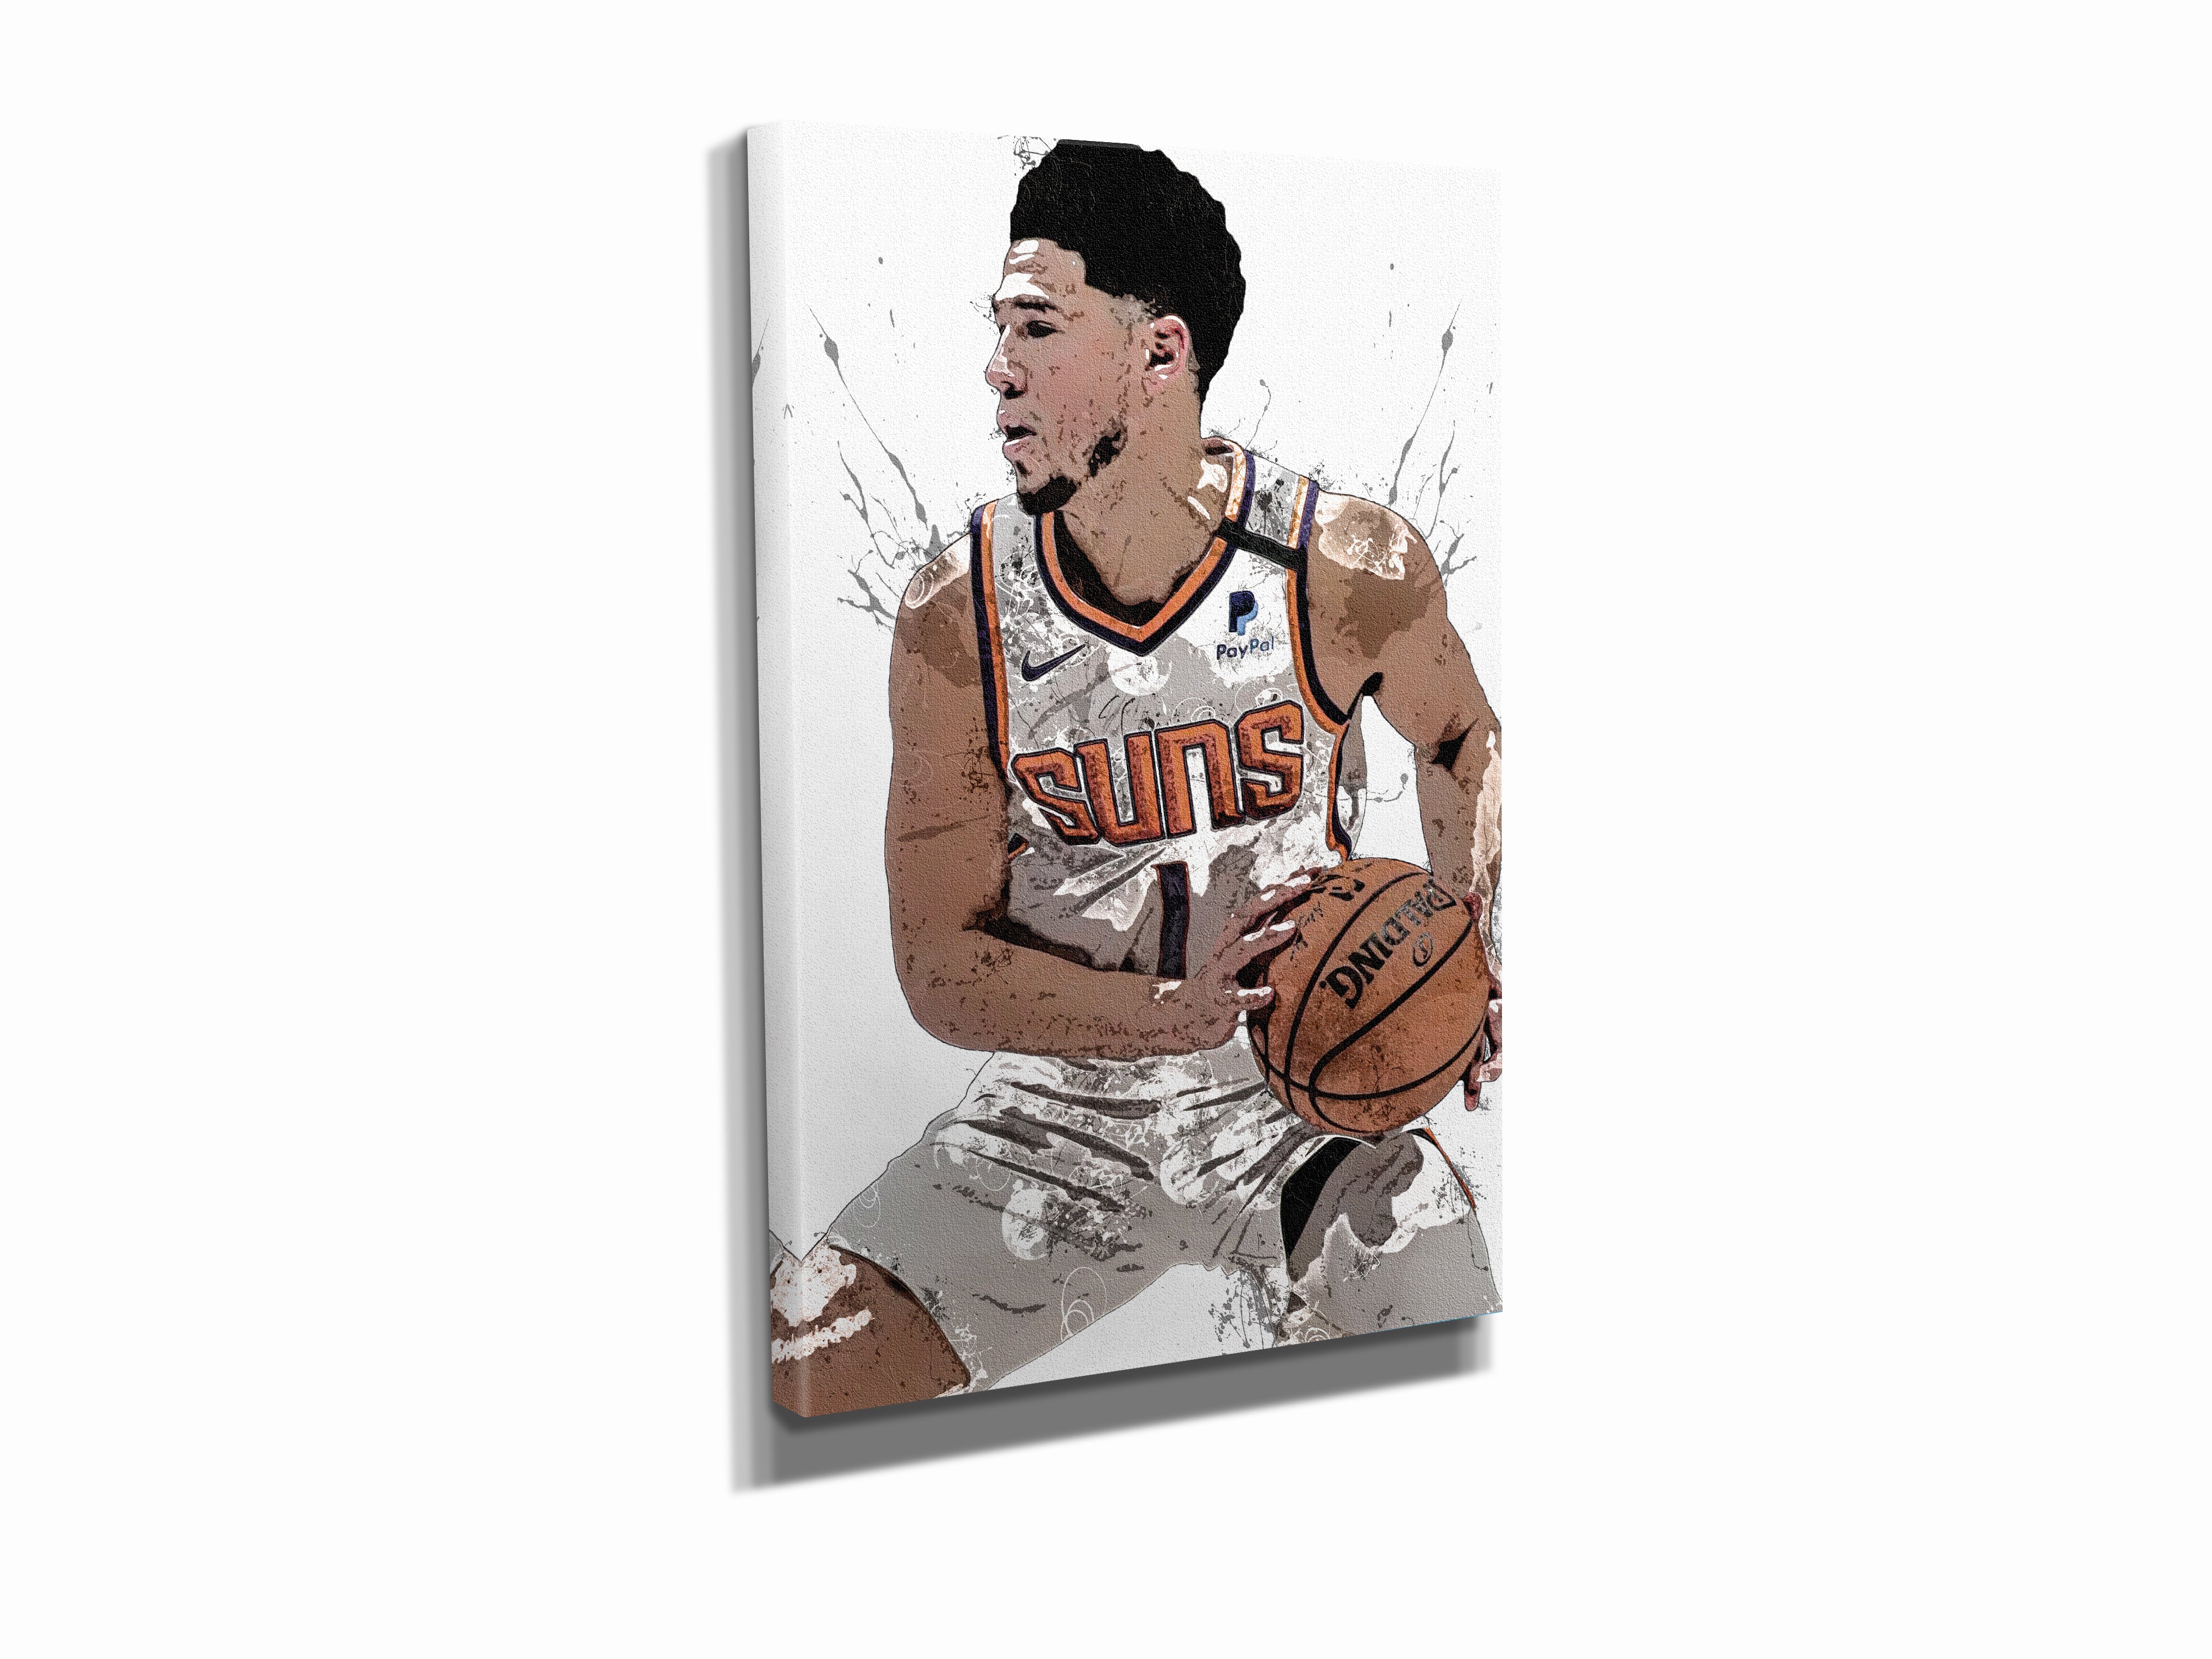  Devin Booker Basketball Art Posters 3 Canvas Poster Bedroom  Decor Sports Landscape Office Room Decor Gift Unframe:20x30inch(50x75cm):  Posters & Prints